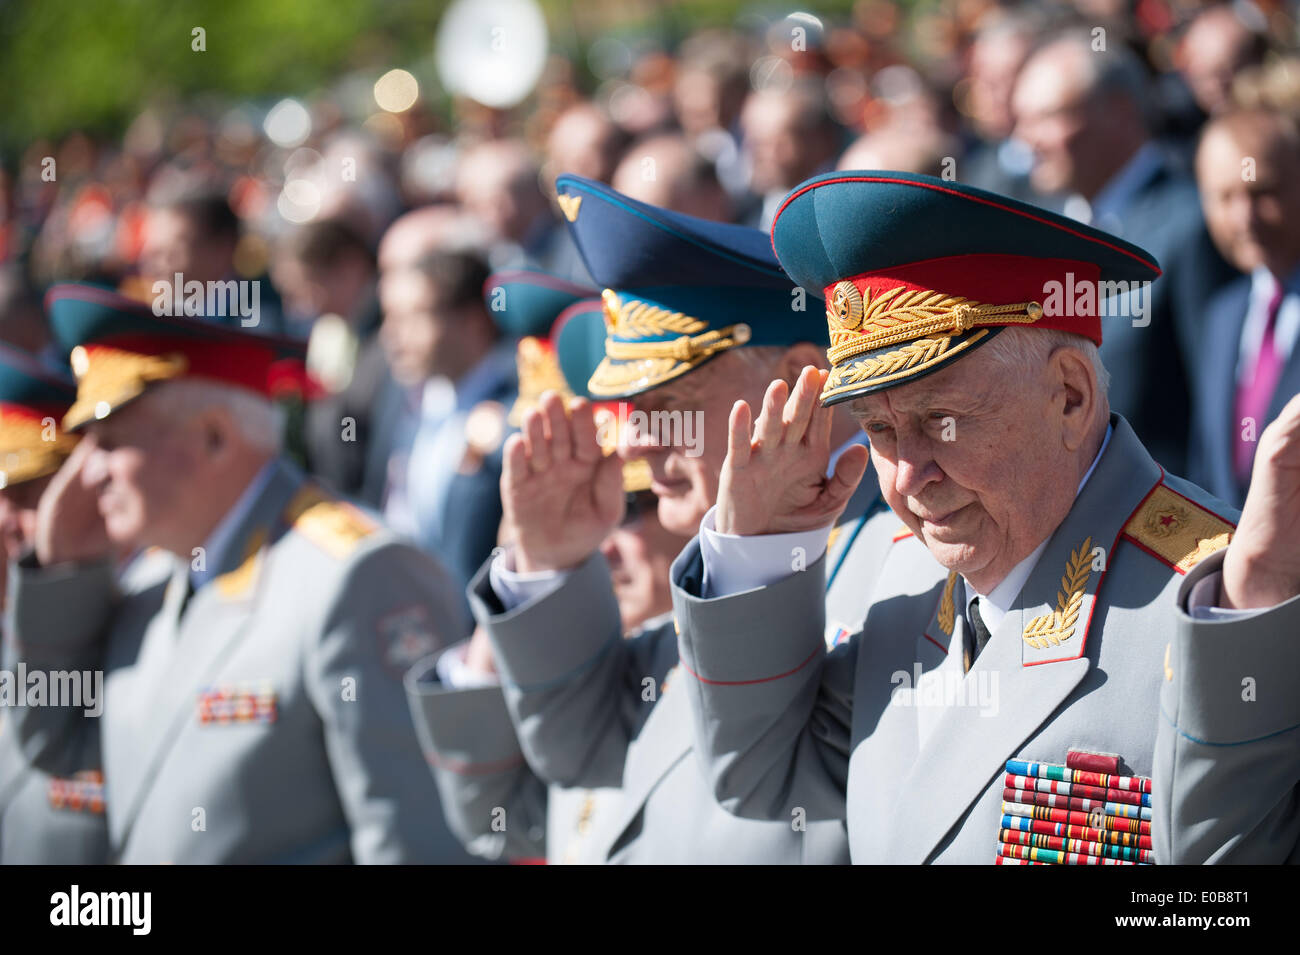 Moscow, Russia. 8th May, 2014. Veterans salute during a wreath laying ceremony in the Alexandrovsky Garden in Moscow, Russia, on May 8, 2014. Russian President Vladimir Putin and officials laid wreath to the Tomb of the Unknown Soldier during the ceremony on the eve of the 69th Victory Day, when the country celebrate victory over Nazi Germany during the World War II. Credit:  Dai Tianfang/Xinhua/Alamy Live News Stock Photo